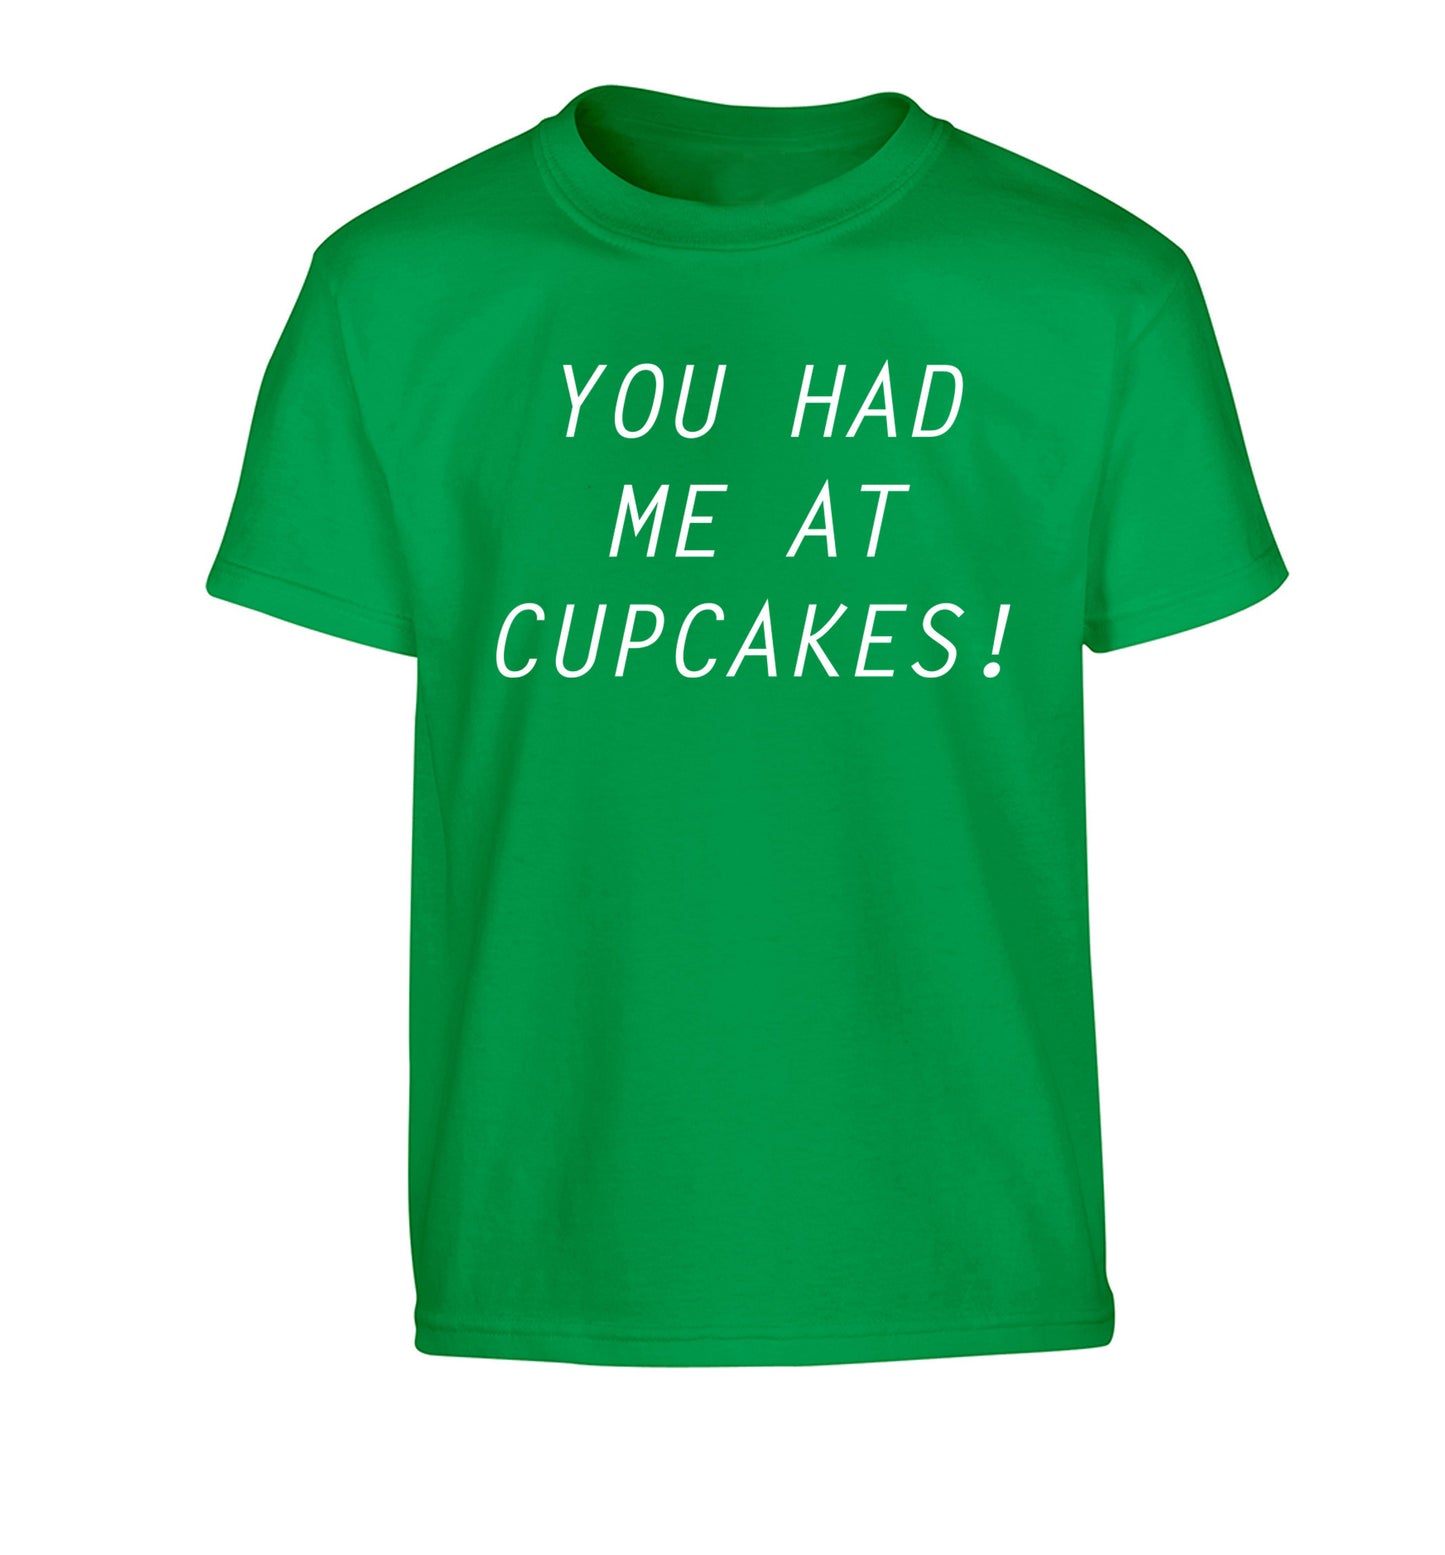 You had me at cupcakes Children's green Tshirt 12-14 Years